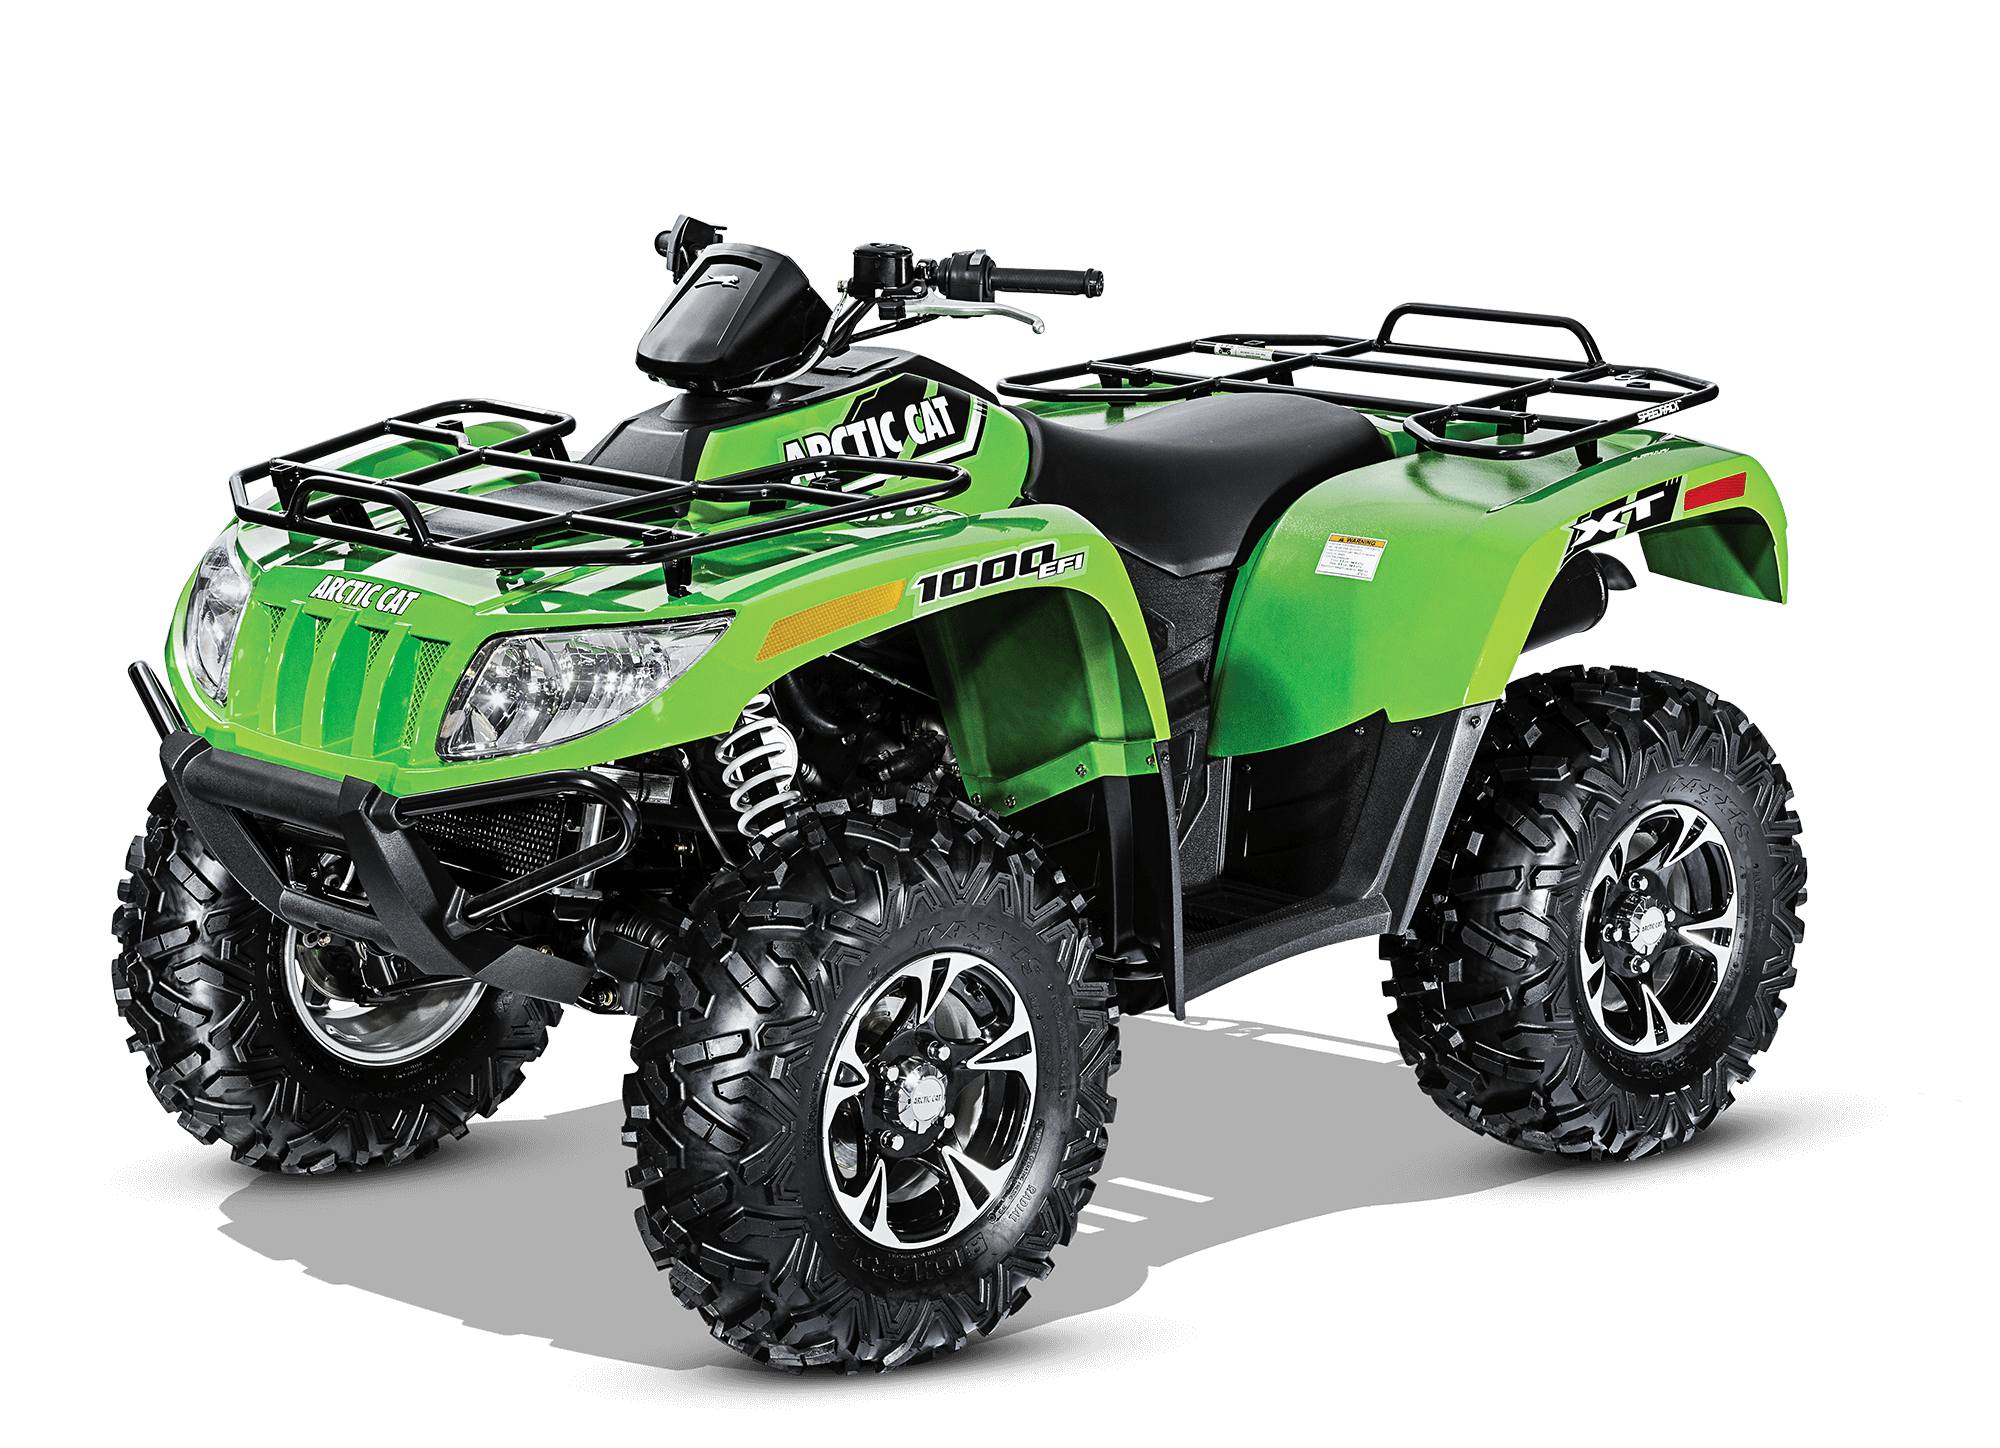 AllTerrain Vehicle Review 2020 Side By Side Reviews